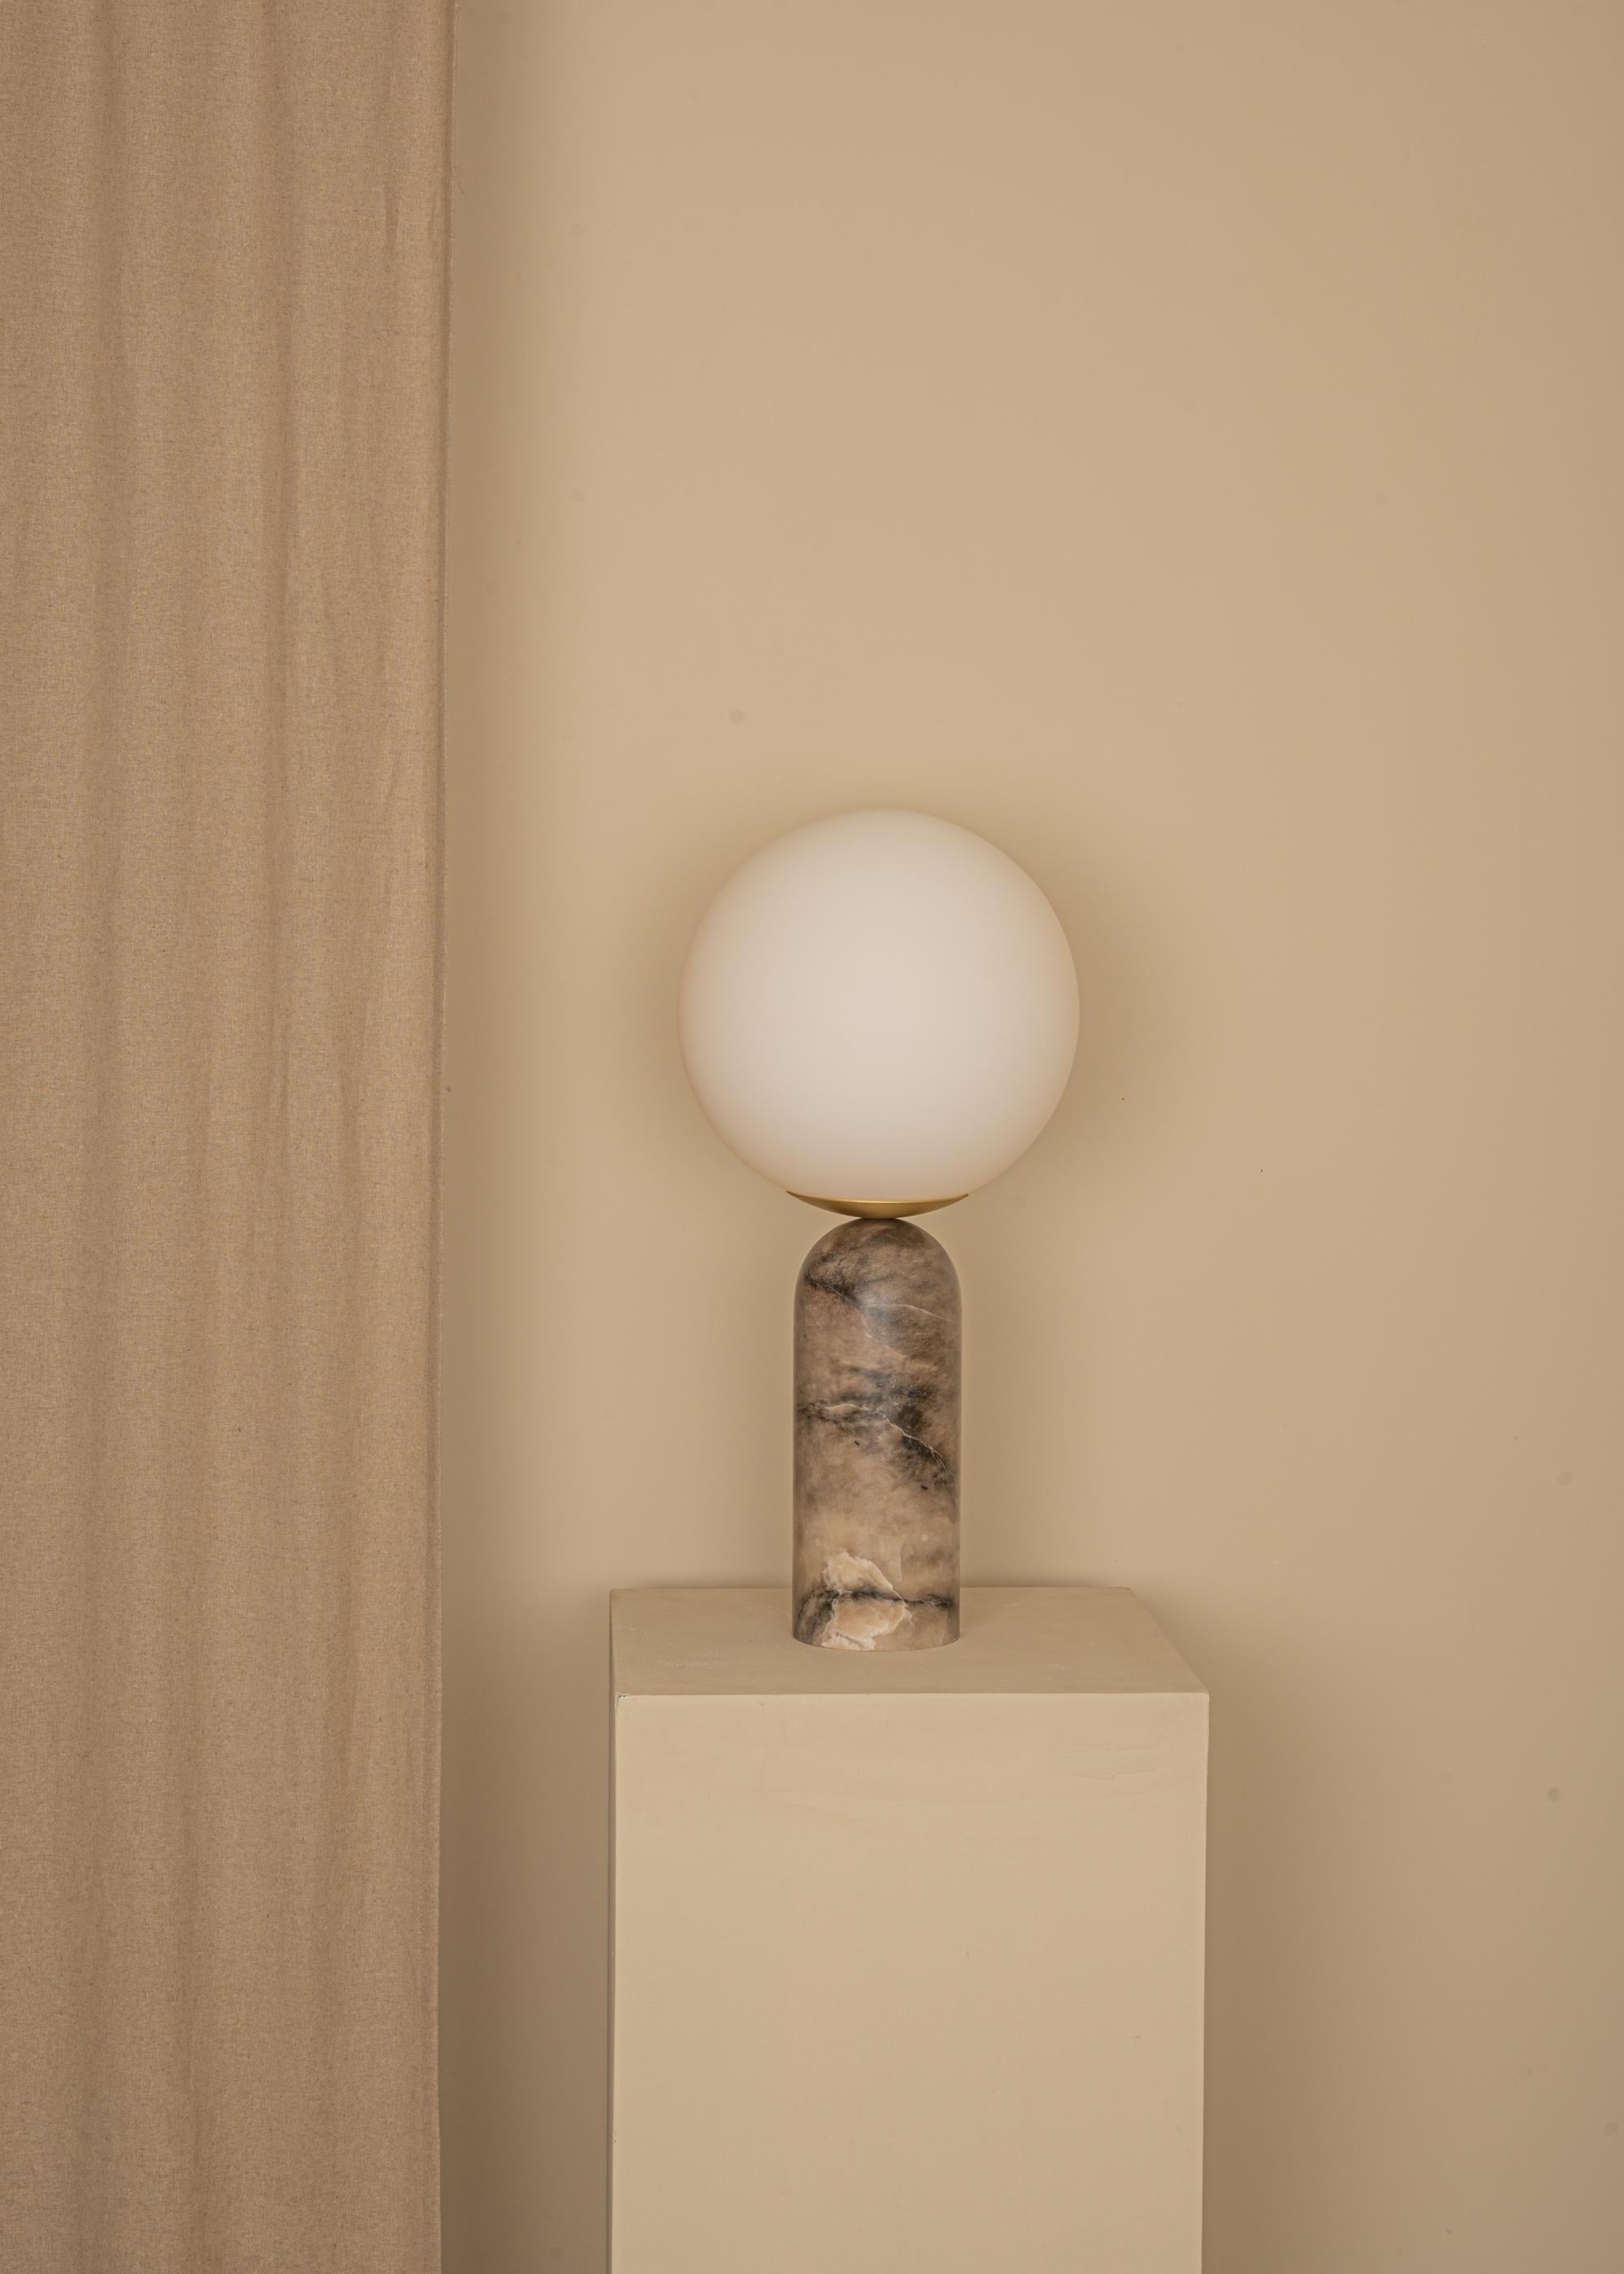 Tobacco Alabaster and Brass Atlas Table Lamp by Simone & Marcel
Dimensions: Ø 30 x H 60 cm.
Materials: Glass, brass and white alabaster.

Also available in different marble, wood and alabaster options and finishes. Custom options available on